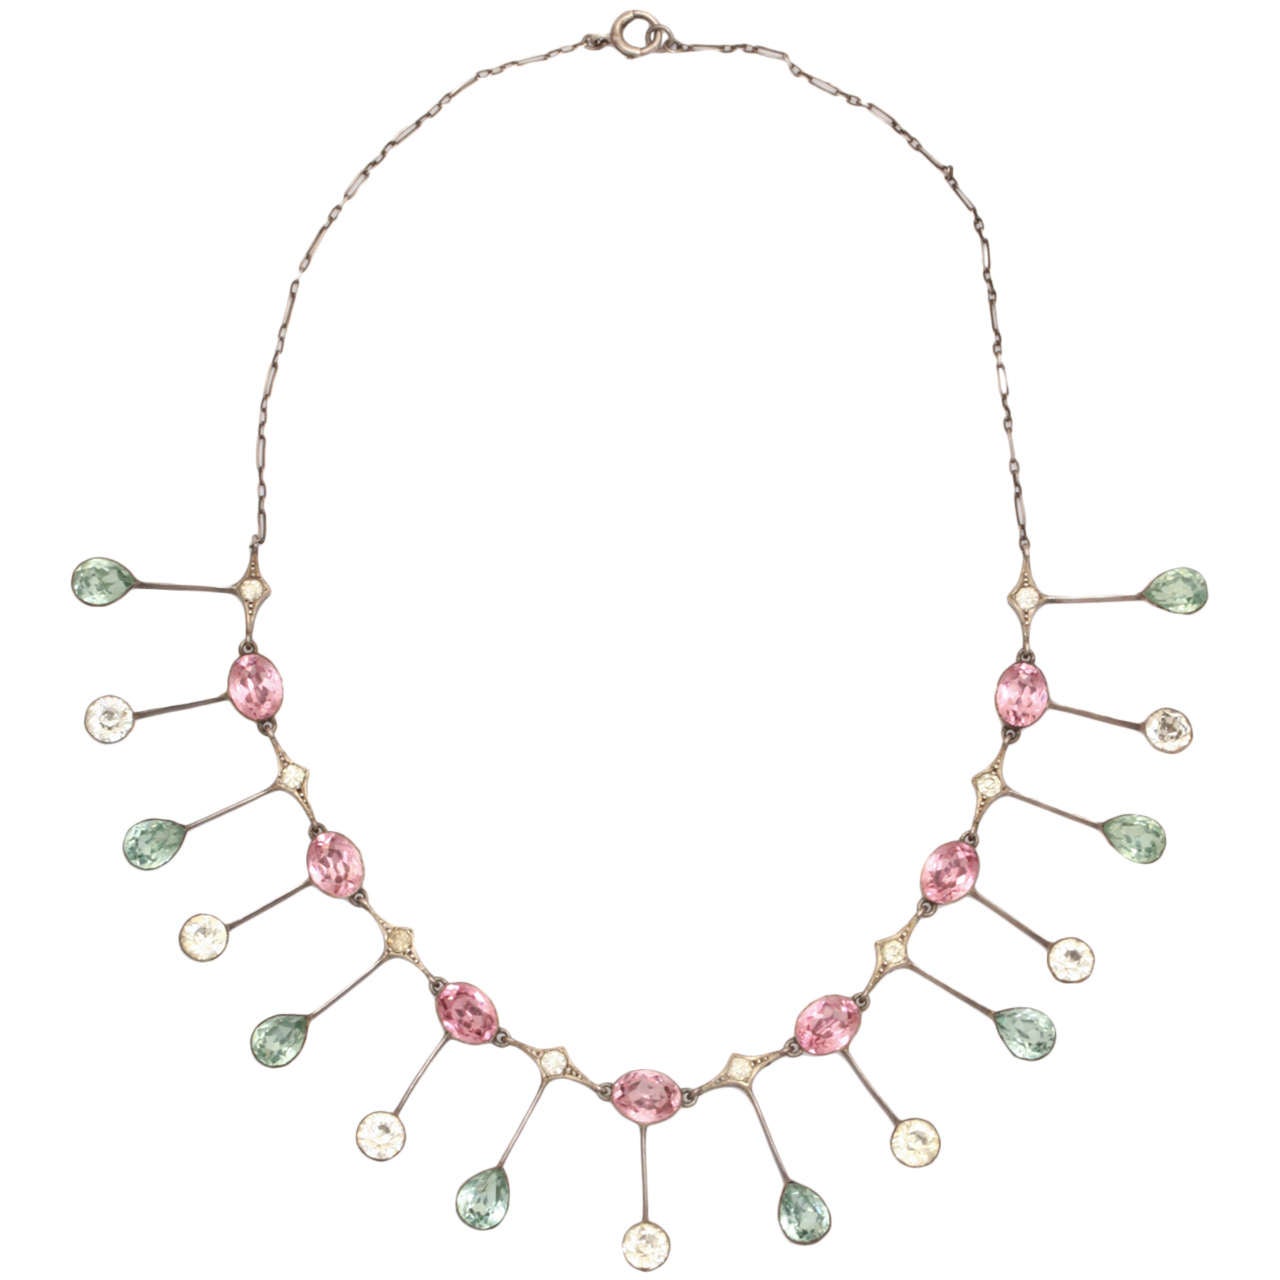 Striking Color Display in an Edwardian Paste Necklace